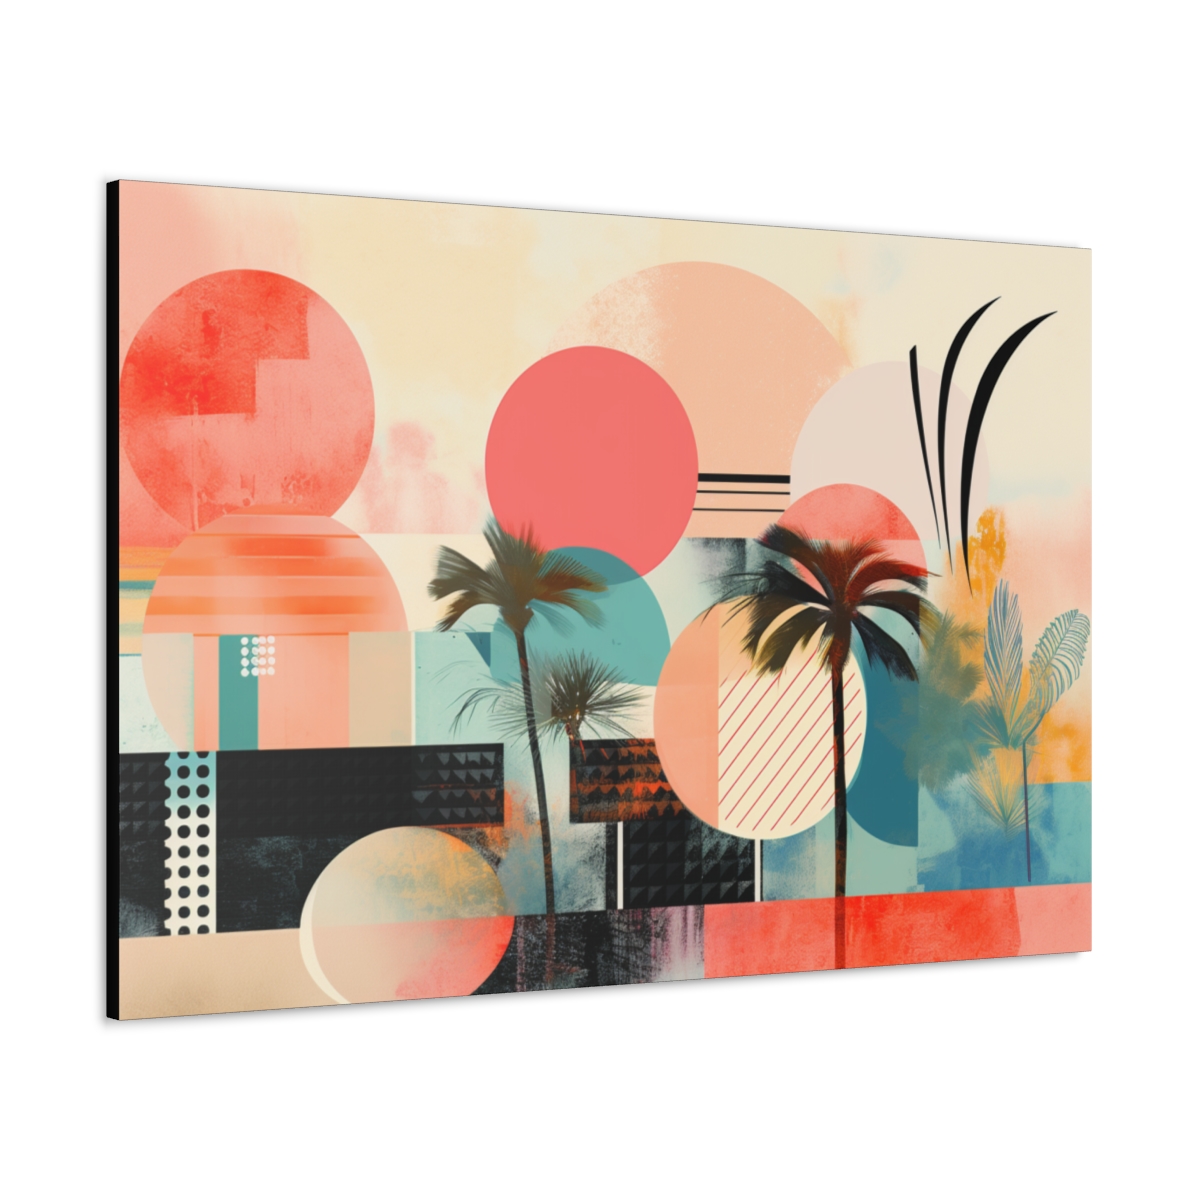 Surreal Wall Art: Tropical Wildness